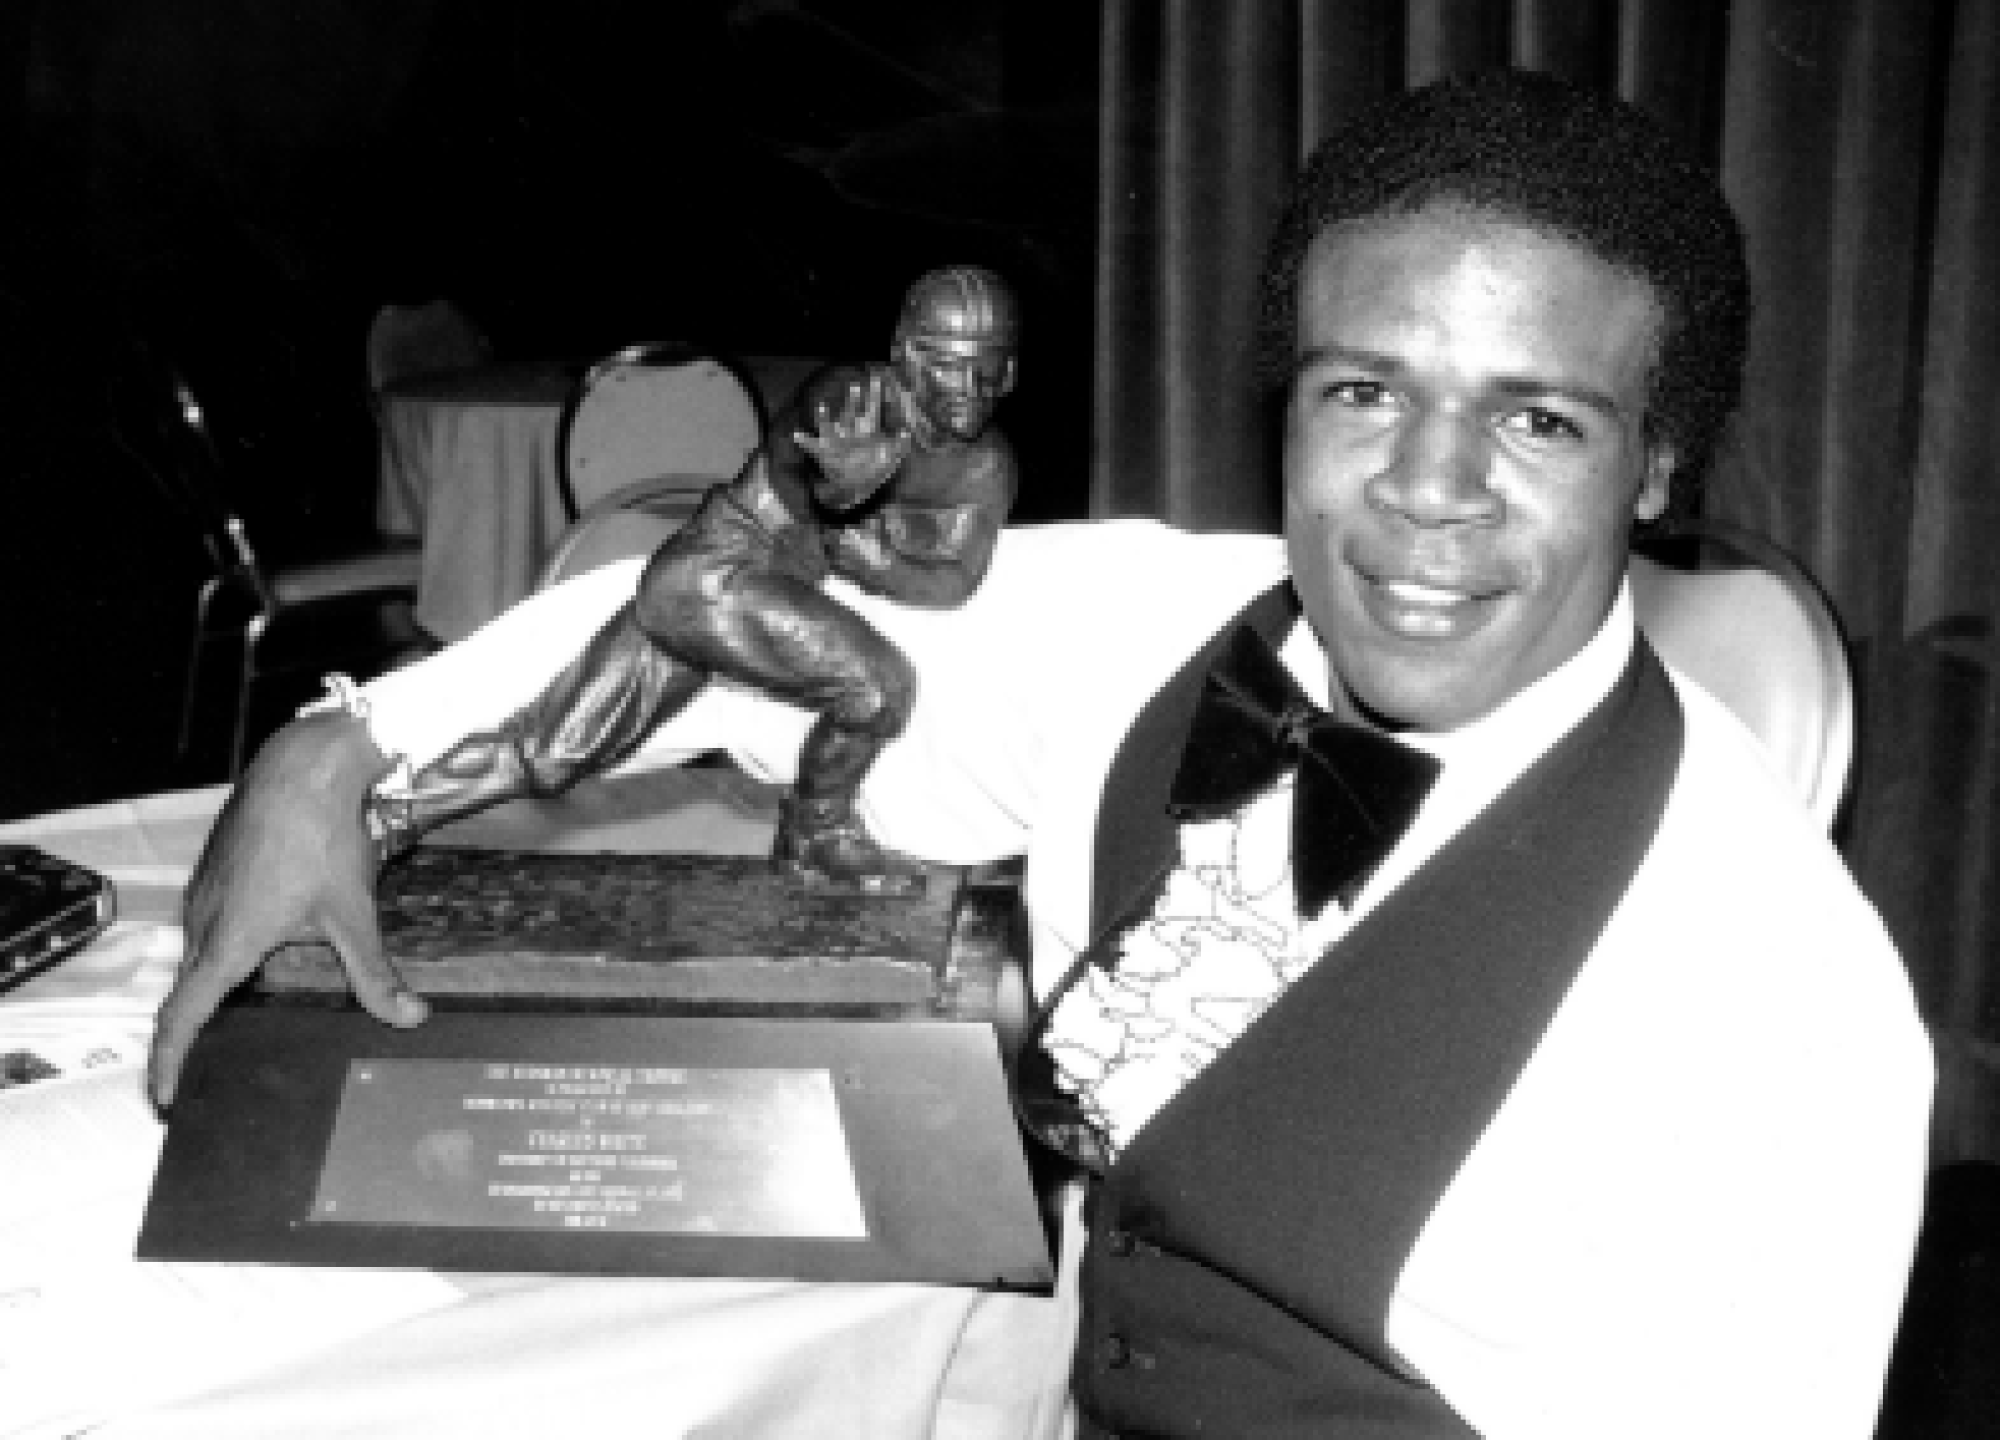 USC running back Charles White poses with the Heisman Trophy on Dec. 12, 1979, in New York.